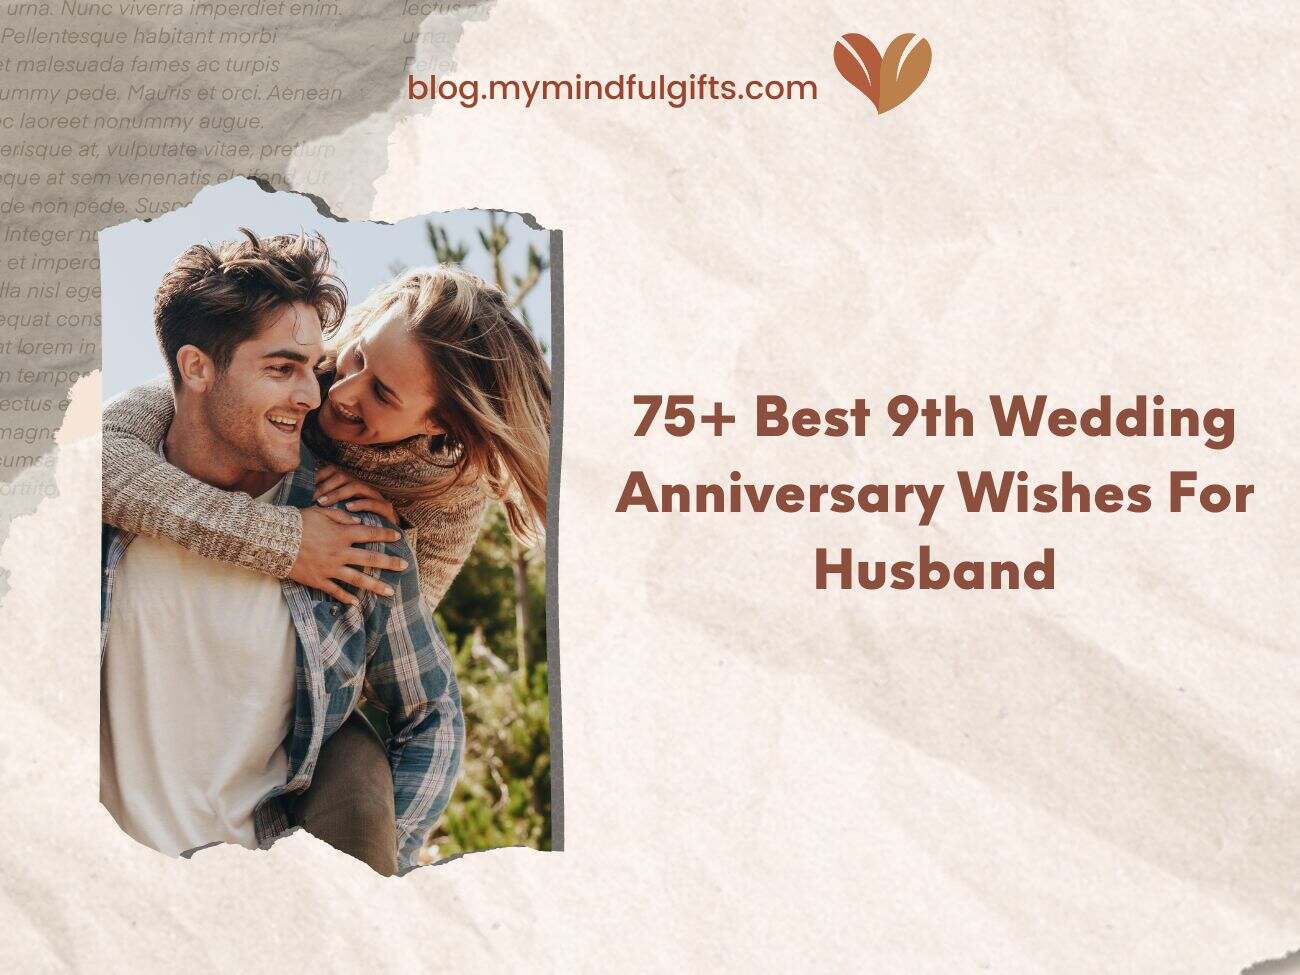 75+ Best 9th Wedding Anniversary Wishes For Husband